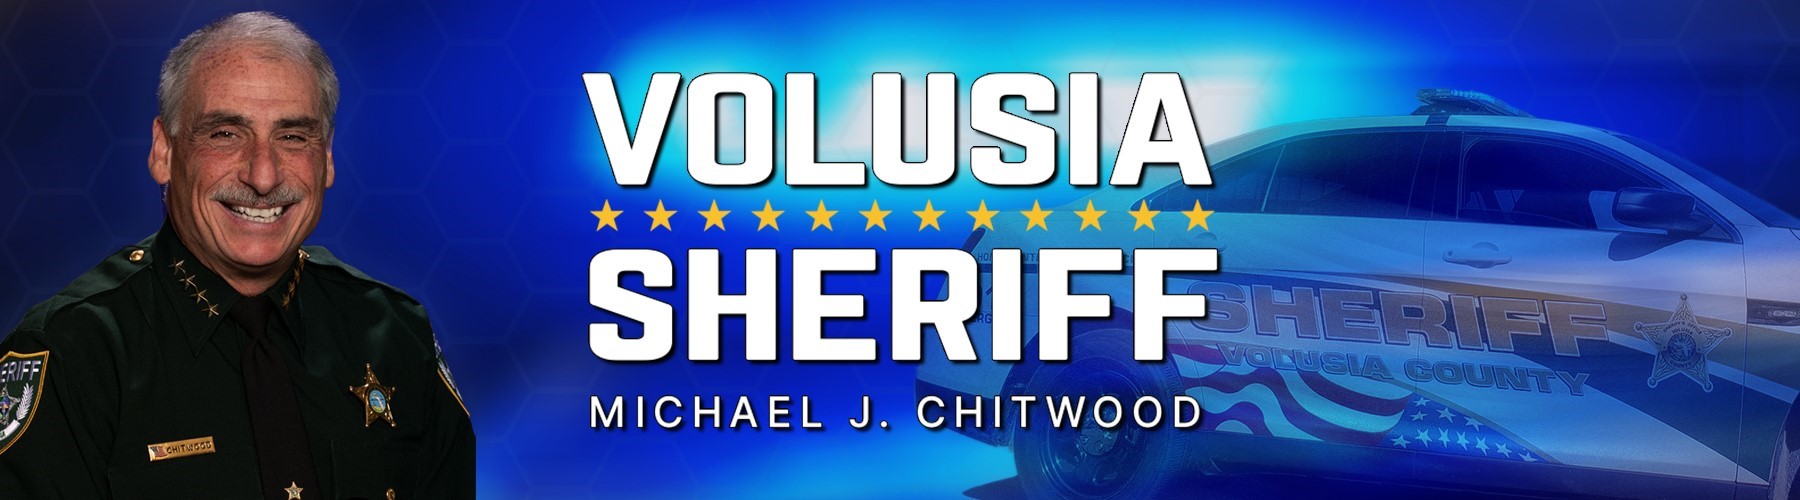 Volusia Sheriff's Office